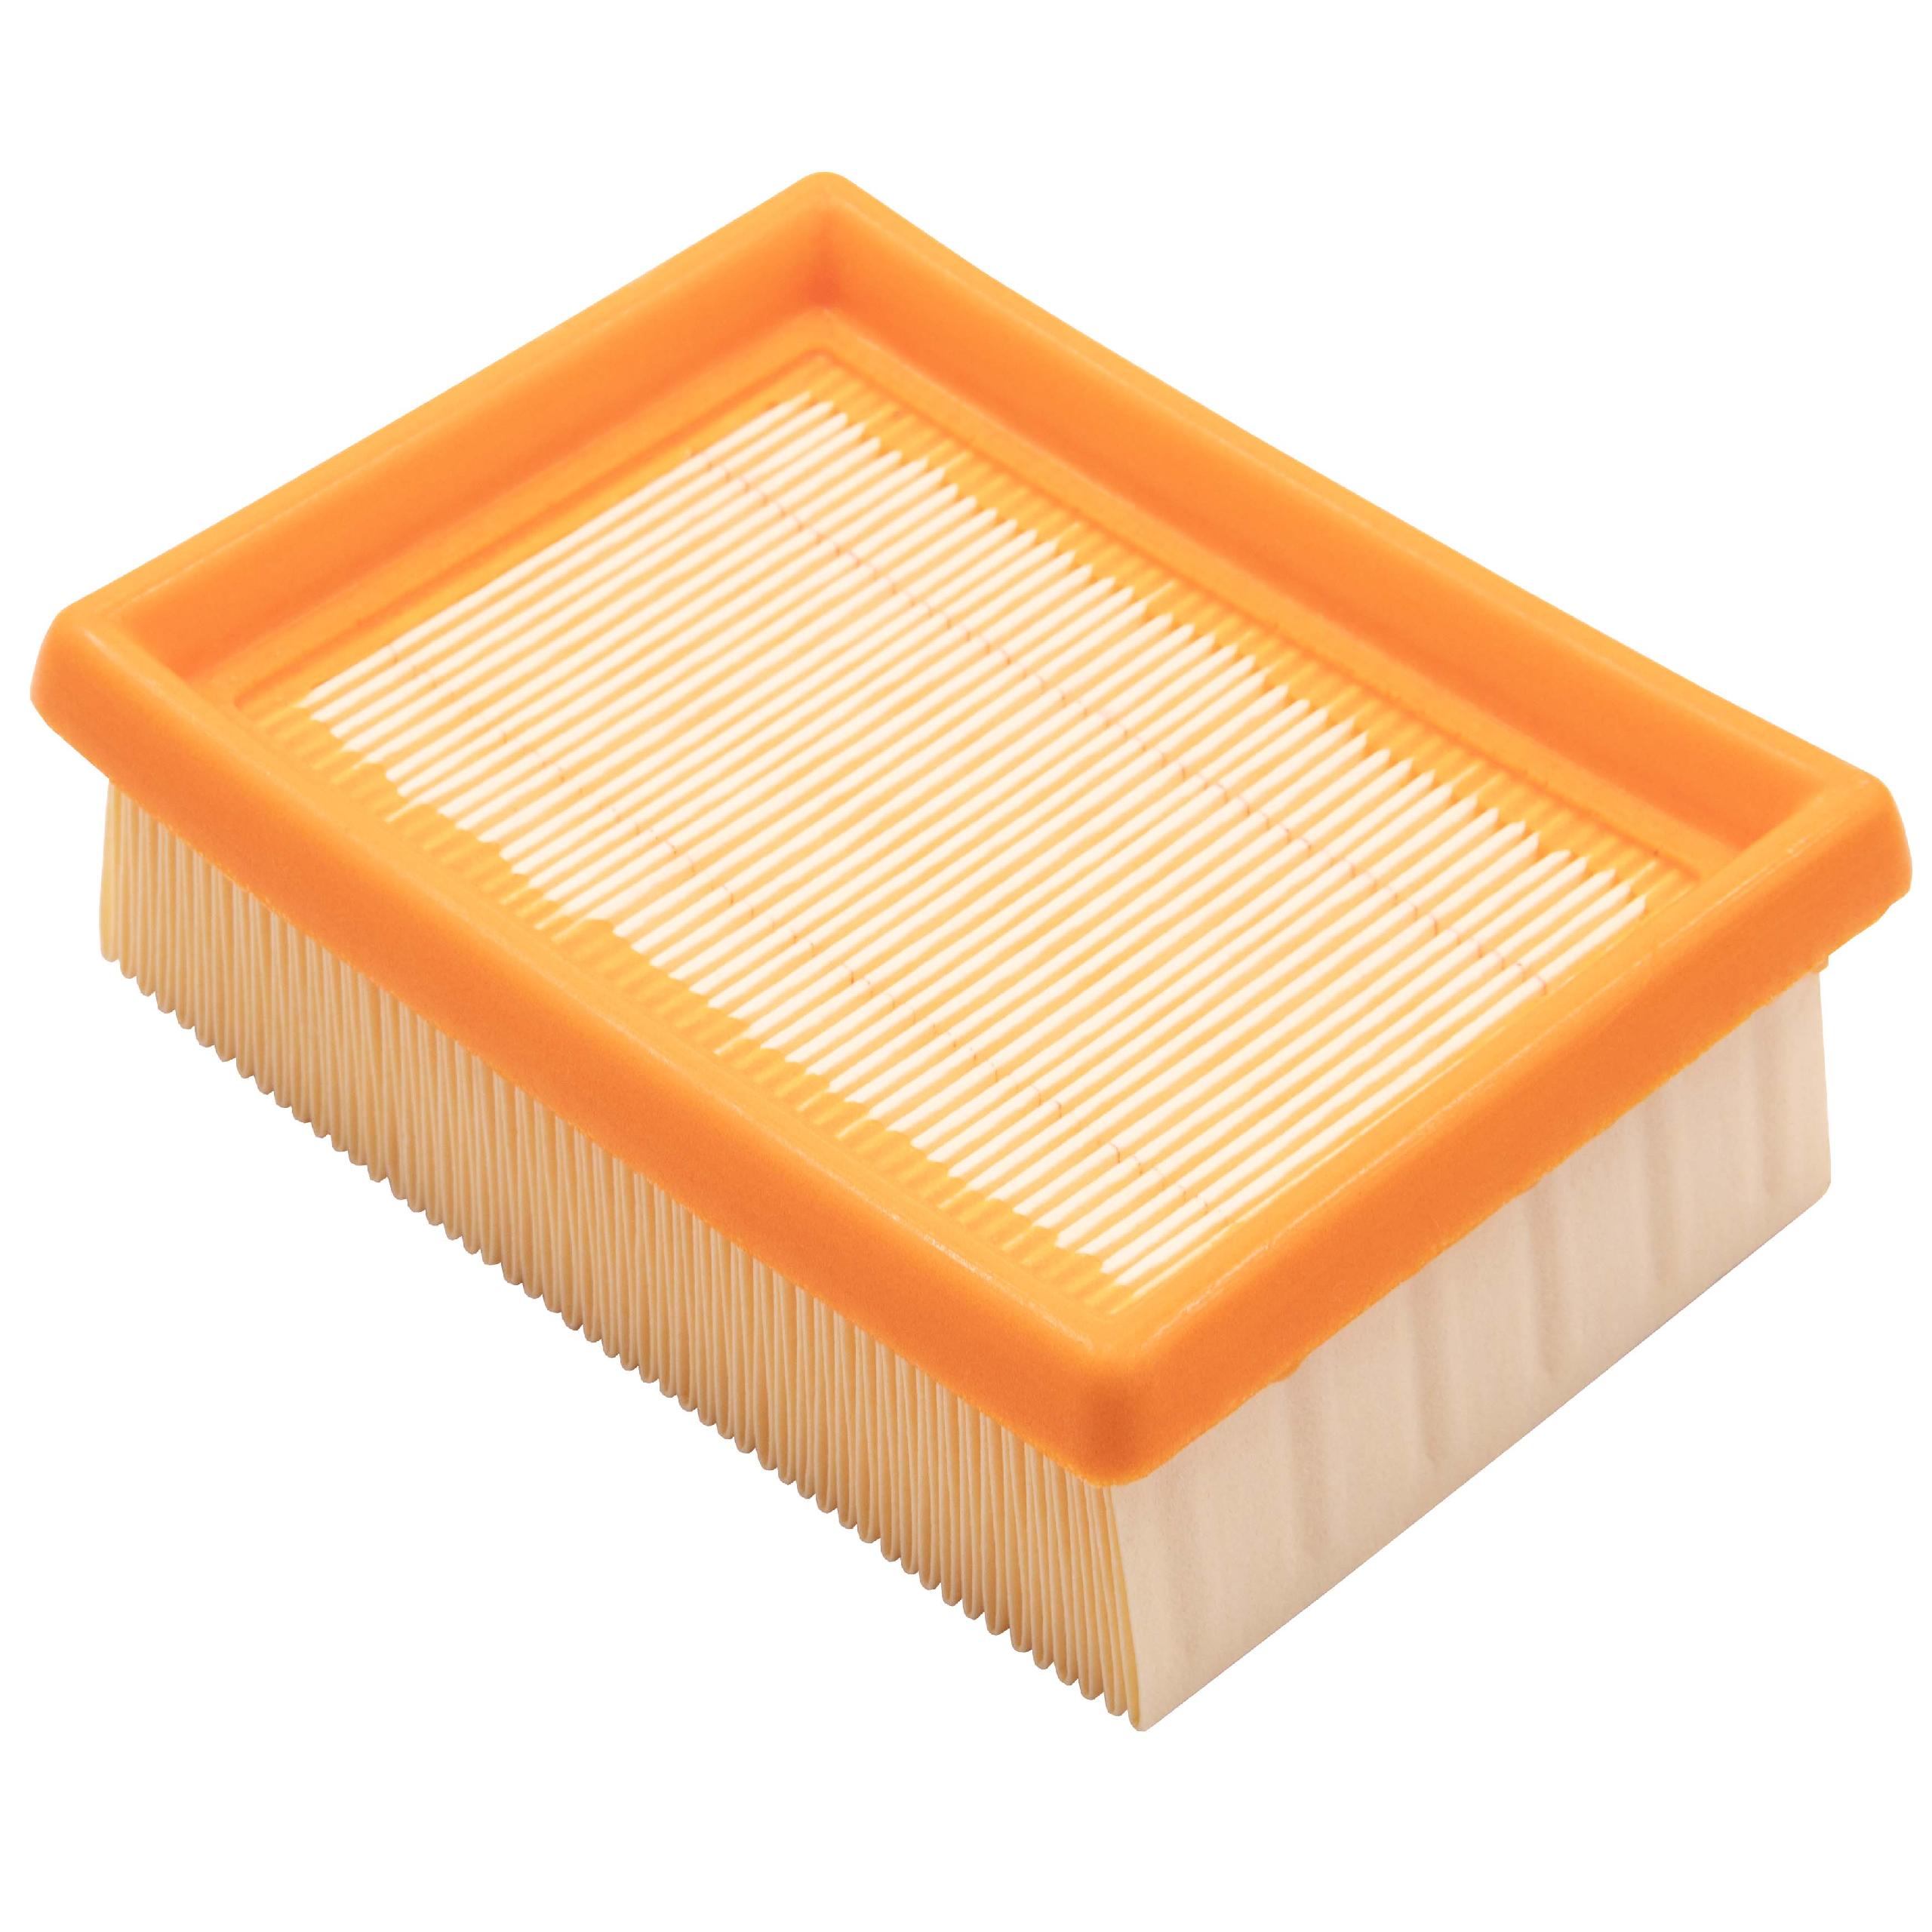 Filter replaces Stihl 42241410300, 4224-141-0300A, 4224-141-0300, 4224 141 0300 for Power Saw - air filter